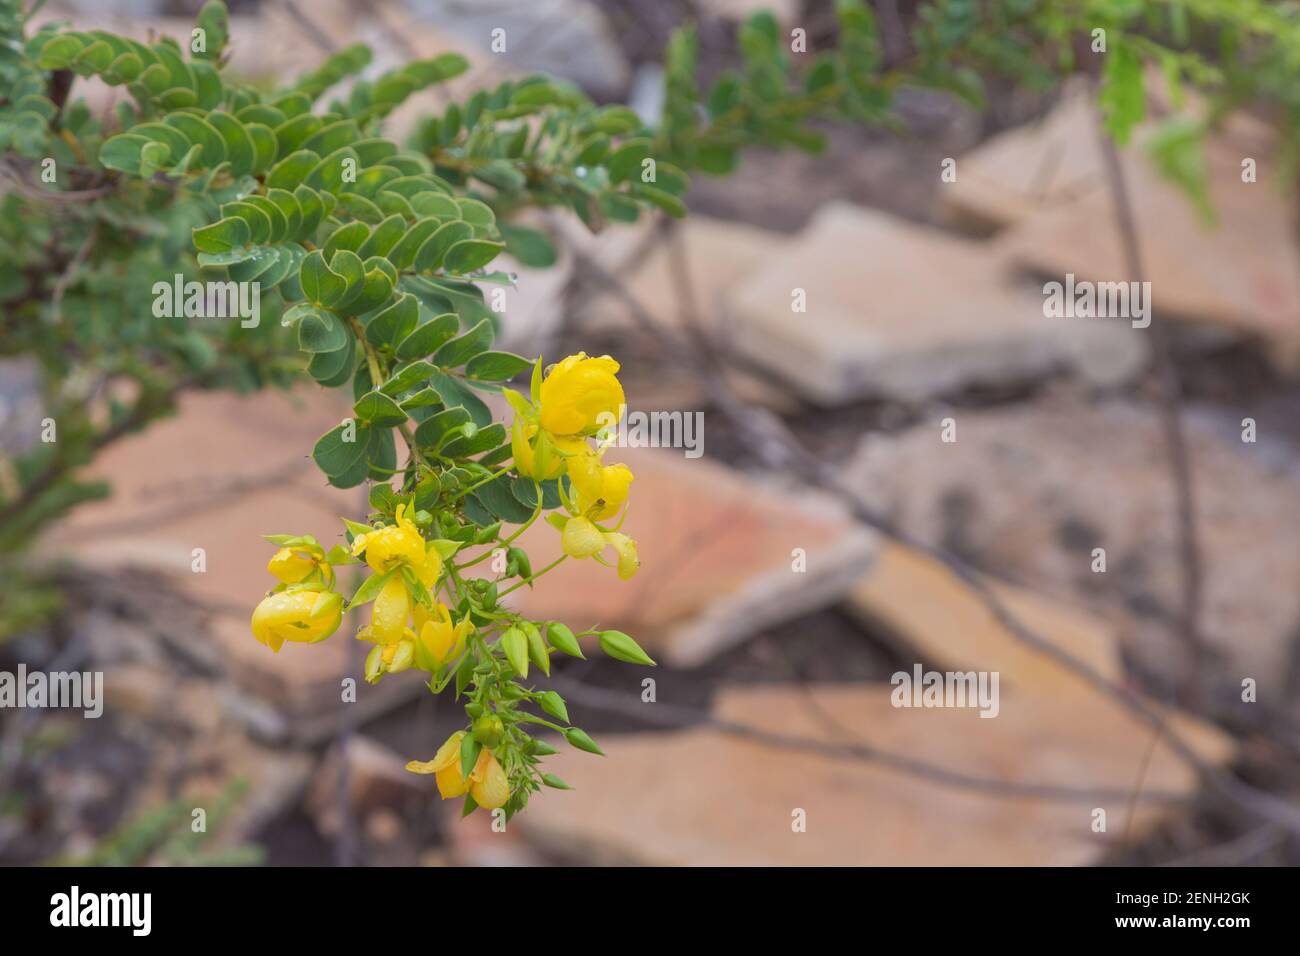 A yellow flowered plant, probably Fabaceae family, in natural habitat close to Cristalia in Minas Gerais Stock Photo